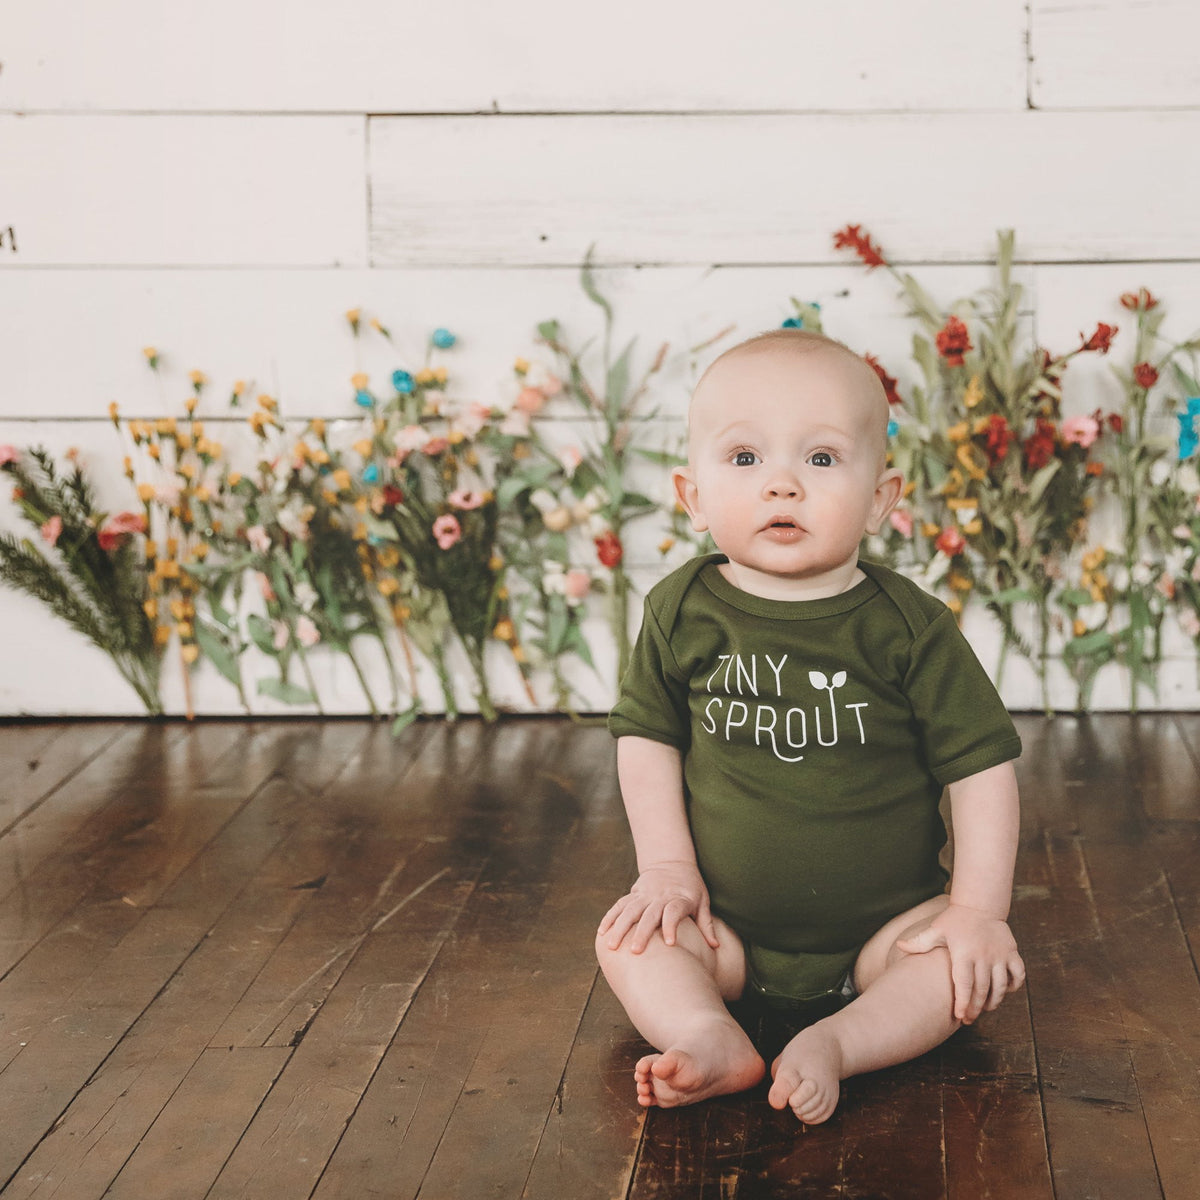 PRE-ORDER - Tiny Sprout baby bodysuit / onesie - Sweetpea and Co.